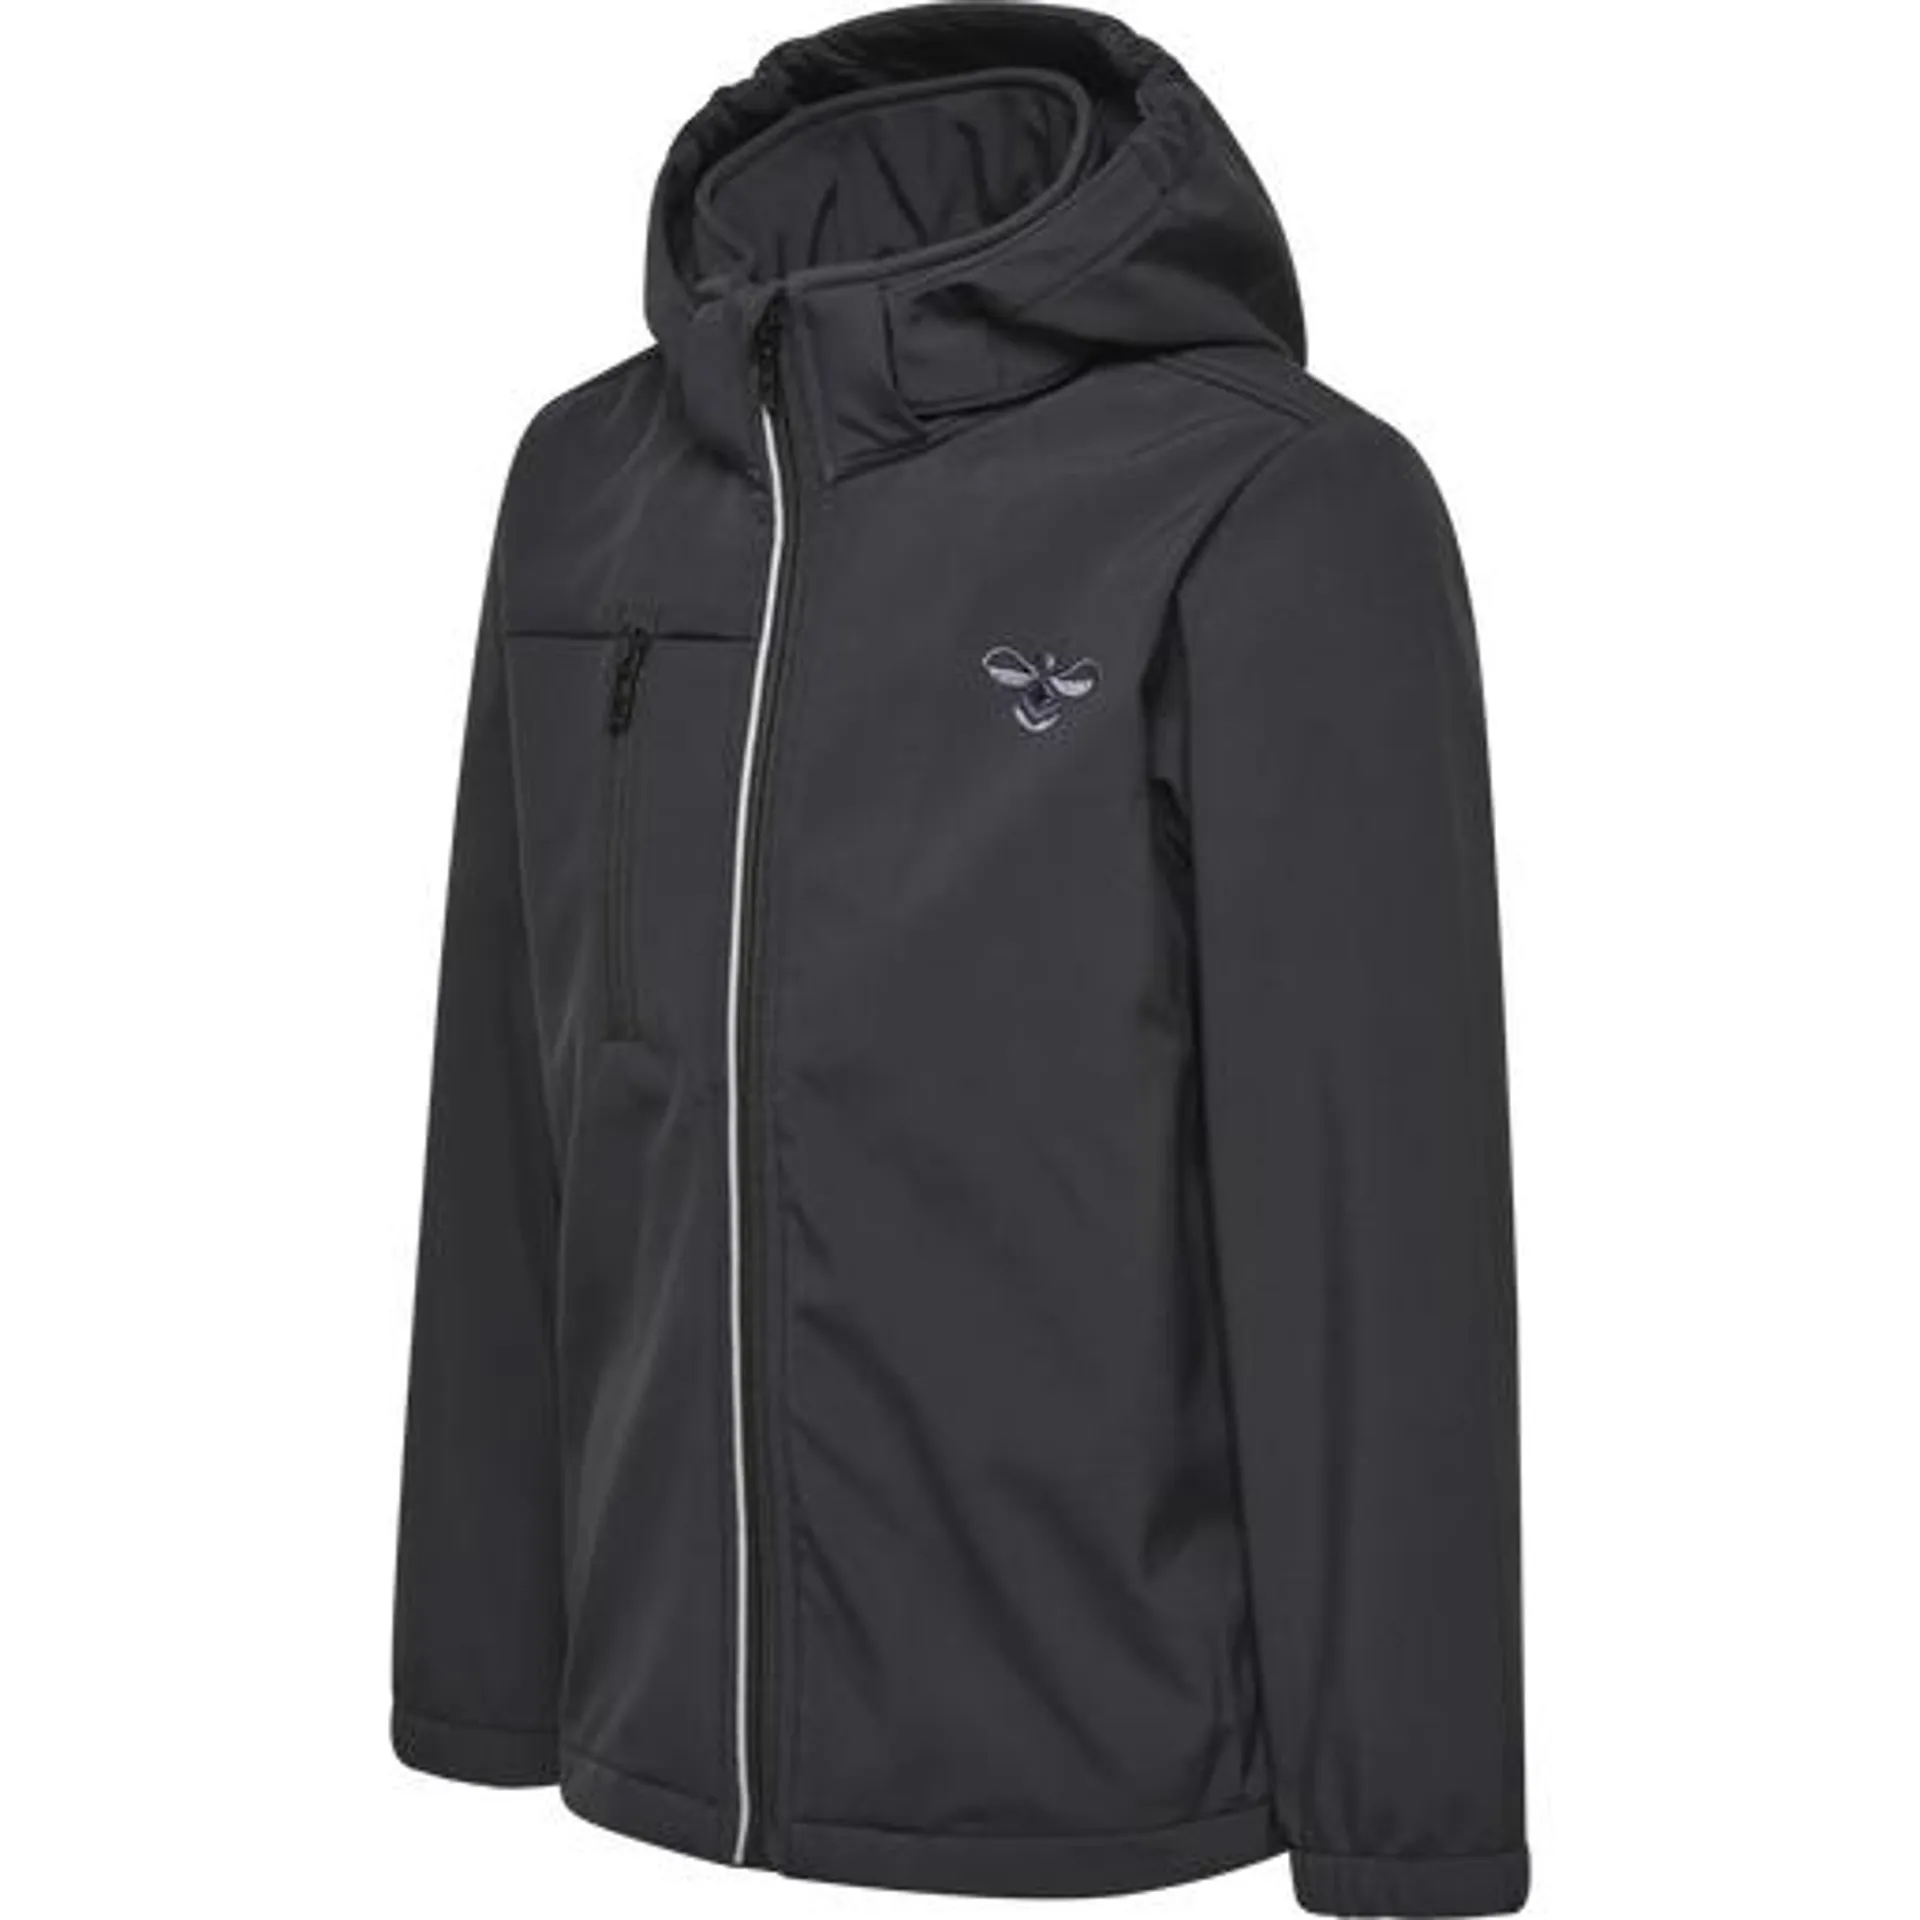 Lightweight softshell jacket for breathable comfort